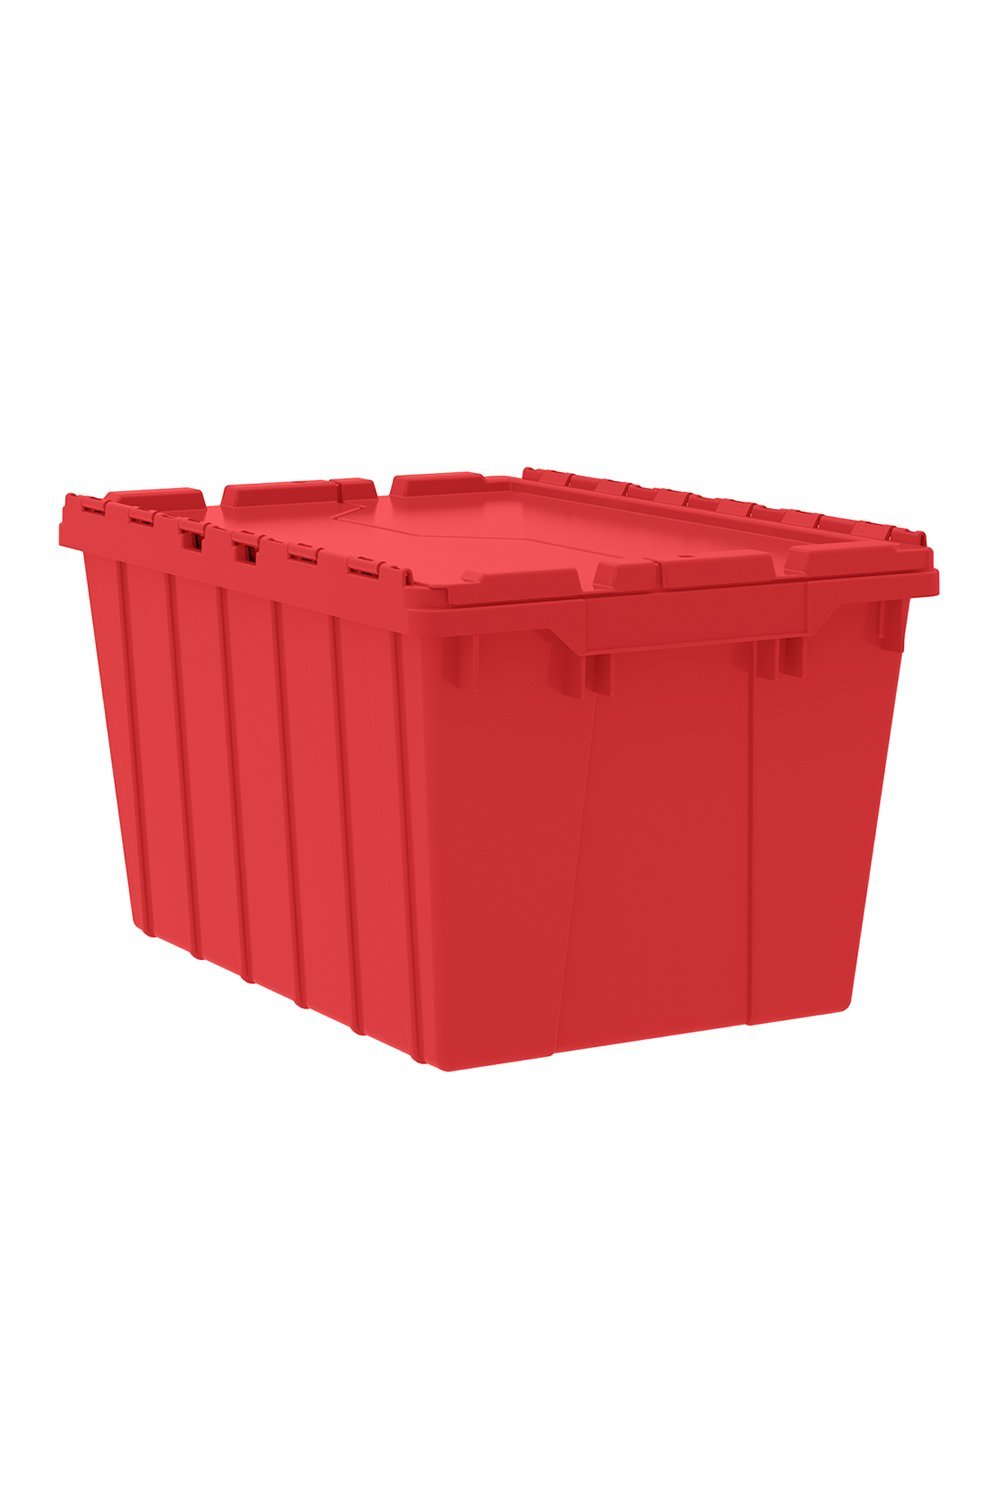 Attached Top Container Bins & Containers Acart 21-1/2"L x 15-1/4"W x 12-3/4"H Red 